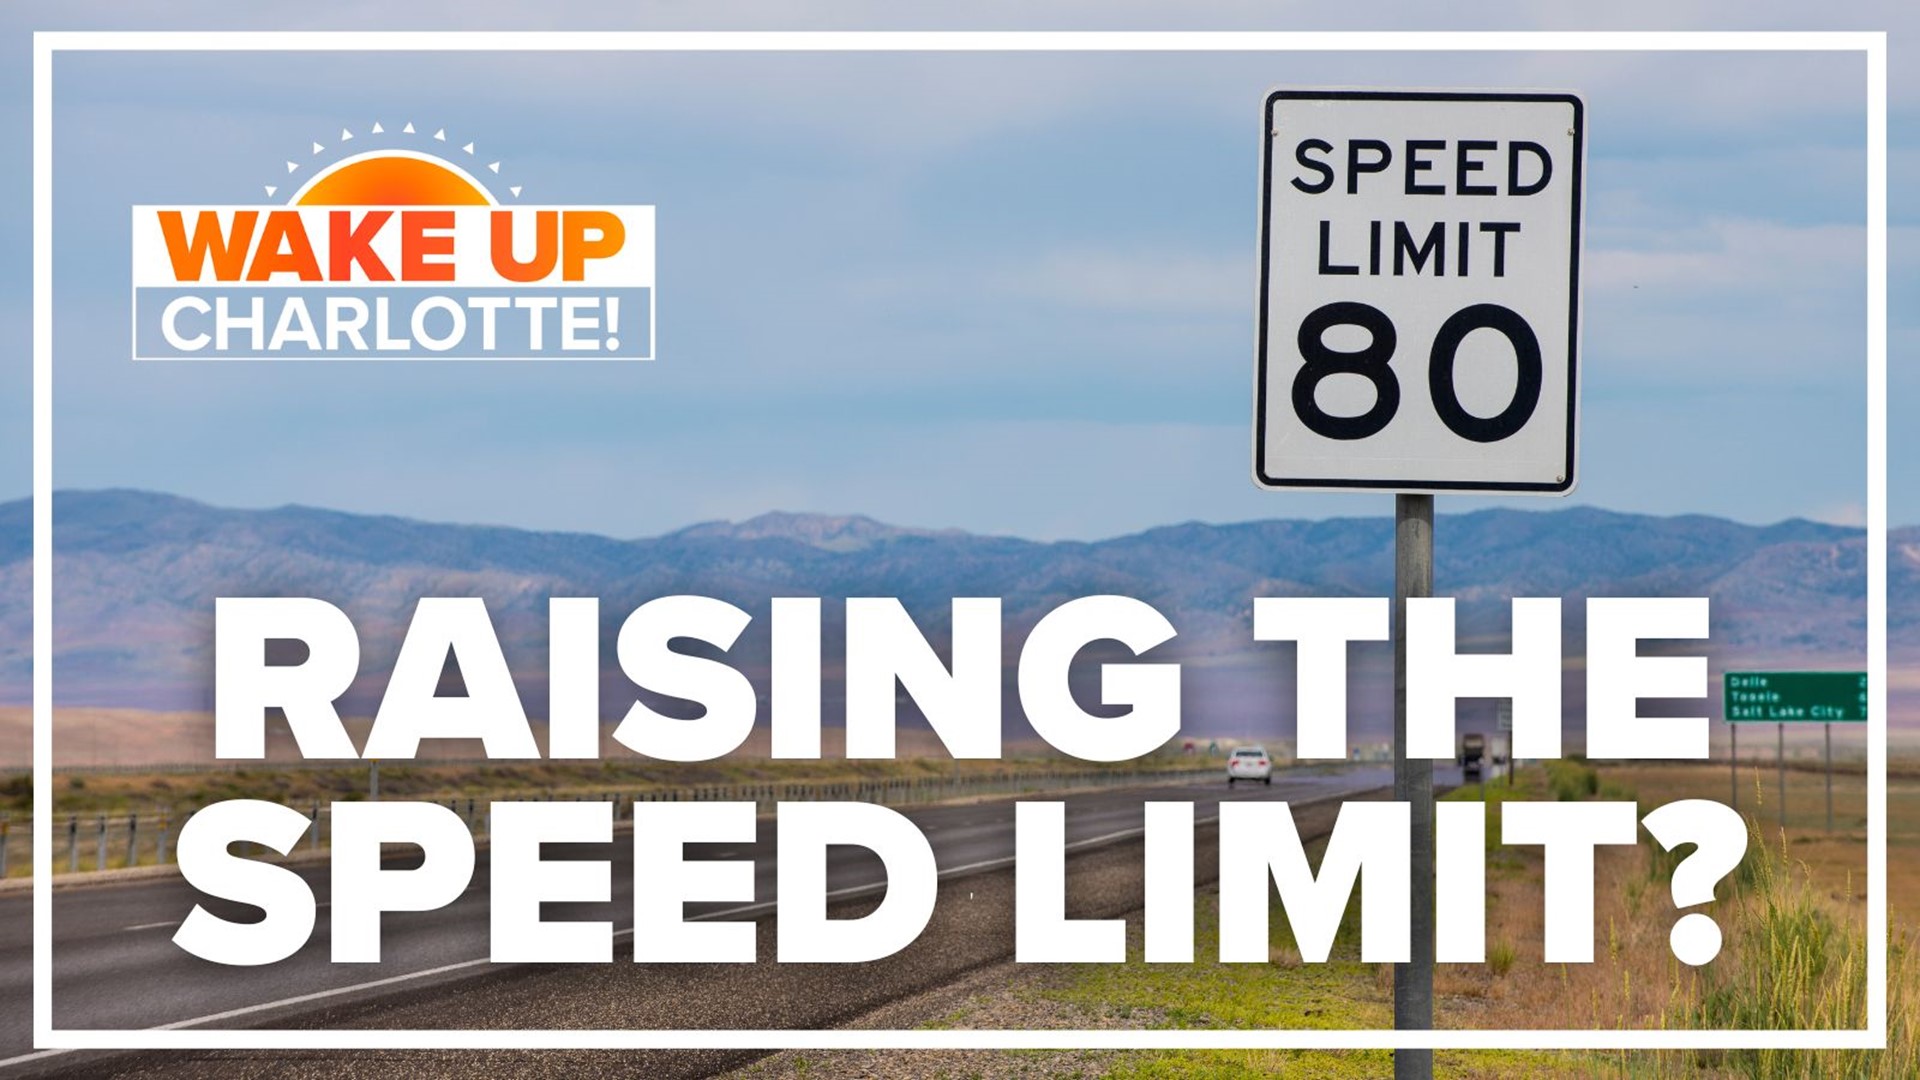 A new bill in the North Carolina House would raise maximum interstate speed limits to 75 mph. Do you think raising speed limits is a good idea?